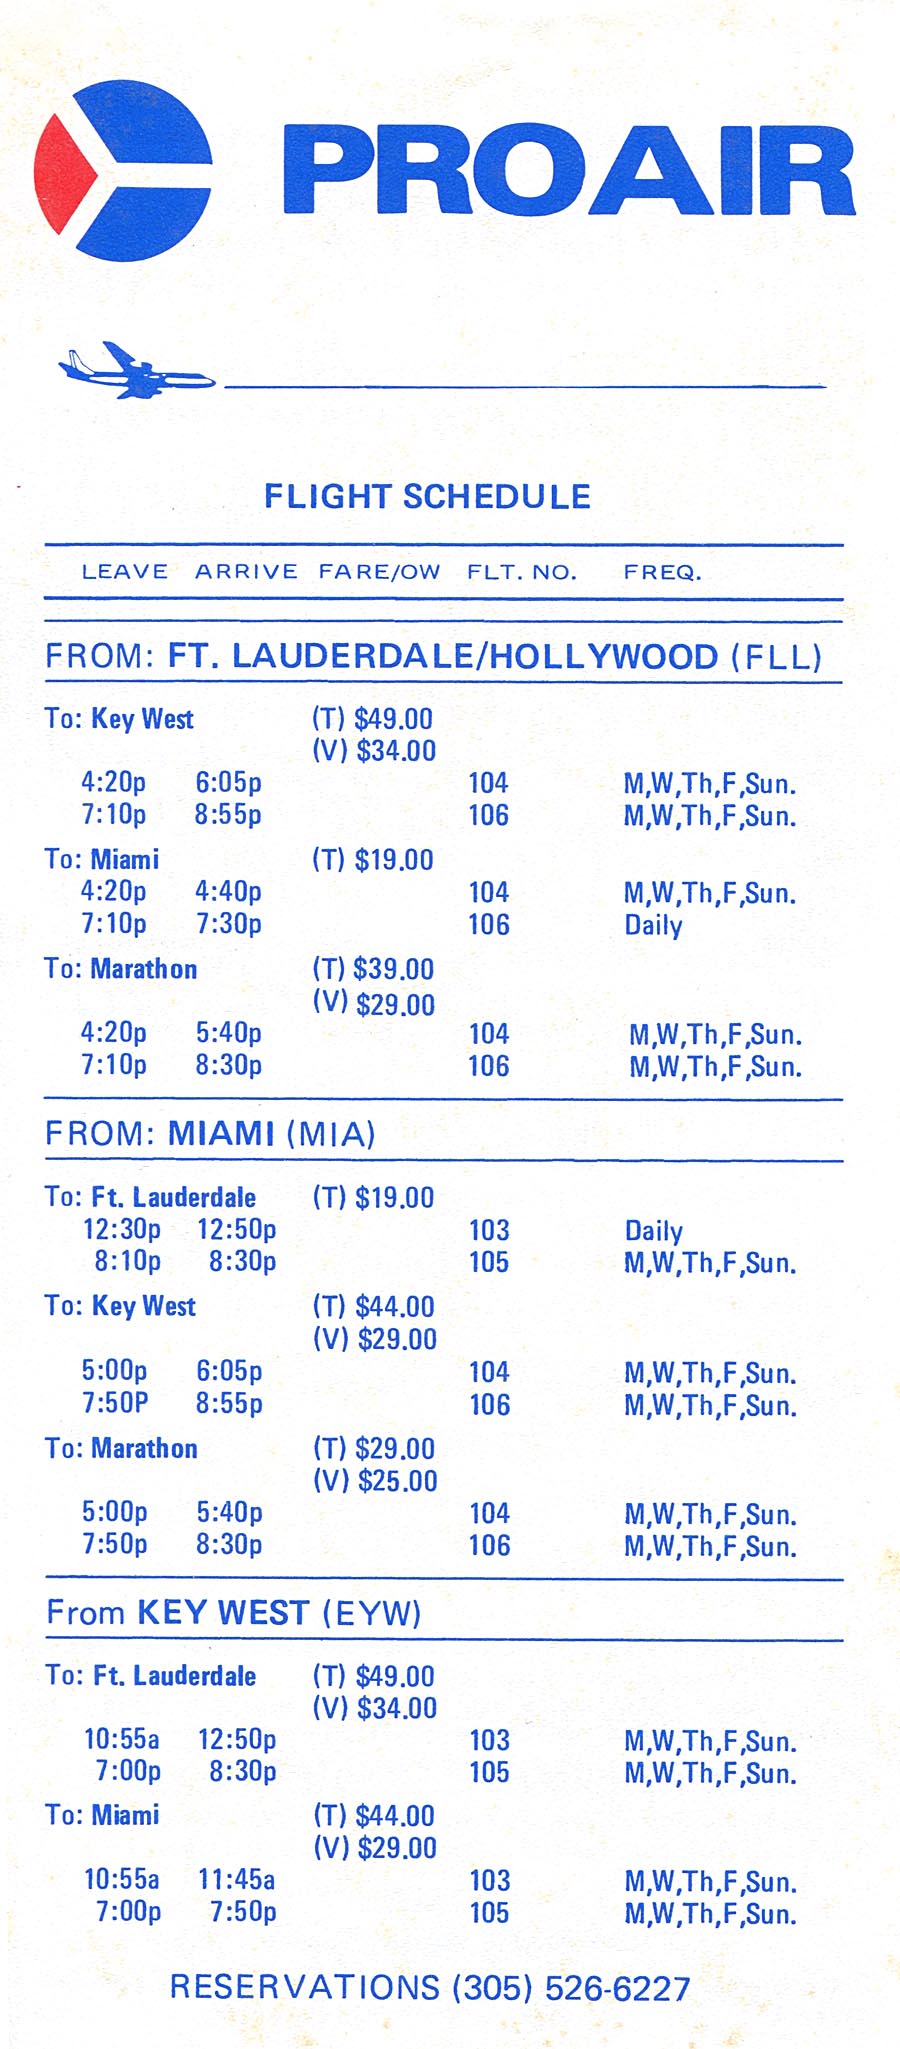 Pro Air timetable from 1981 showing service between Ft. Lauderdale, Miami, Marathon and Key West, Florida.